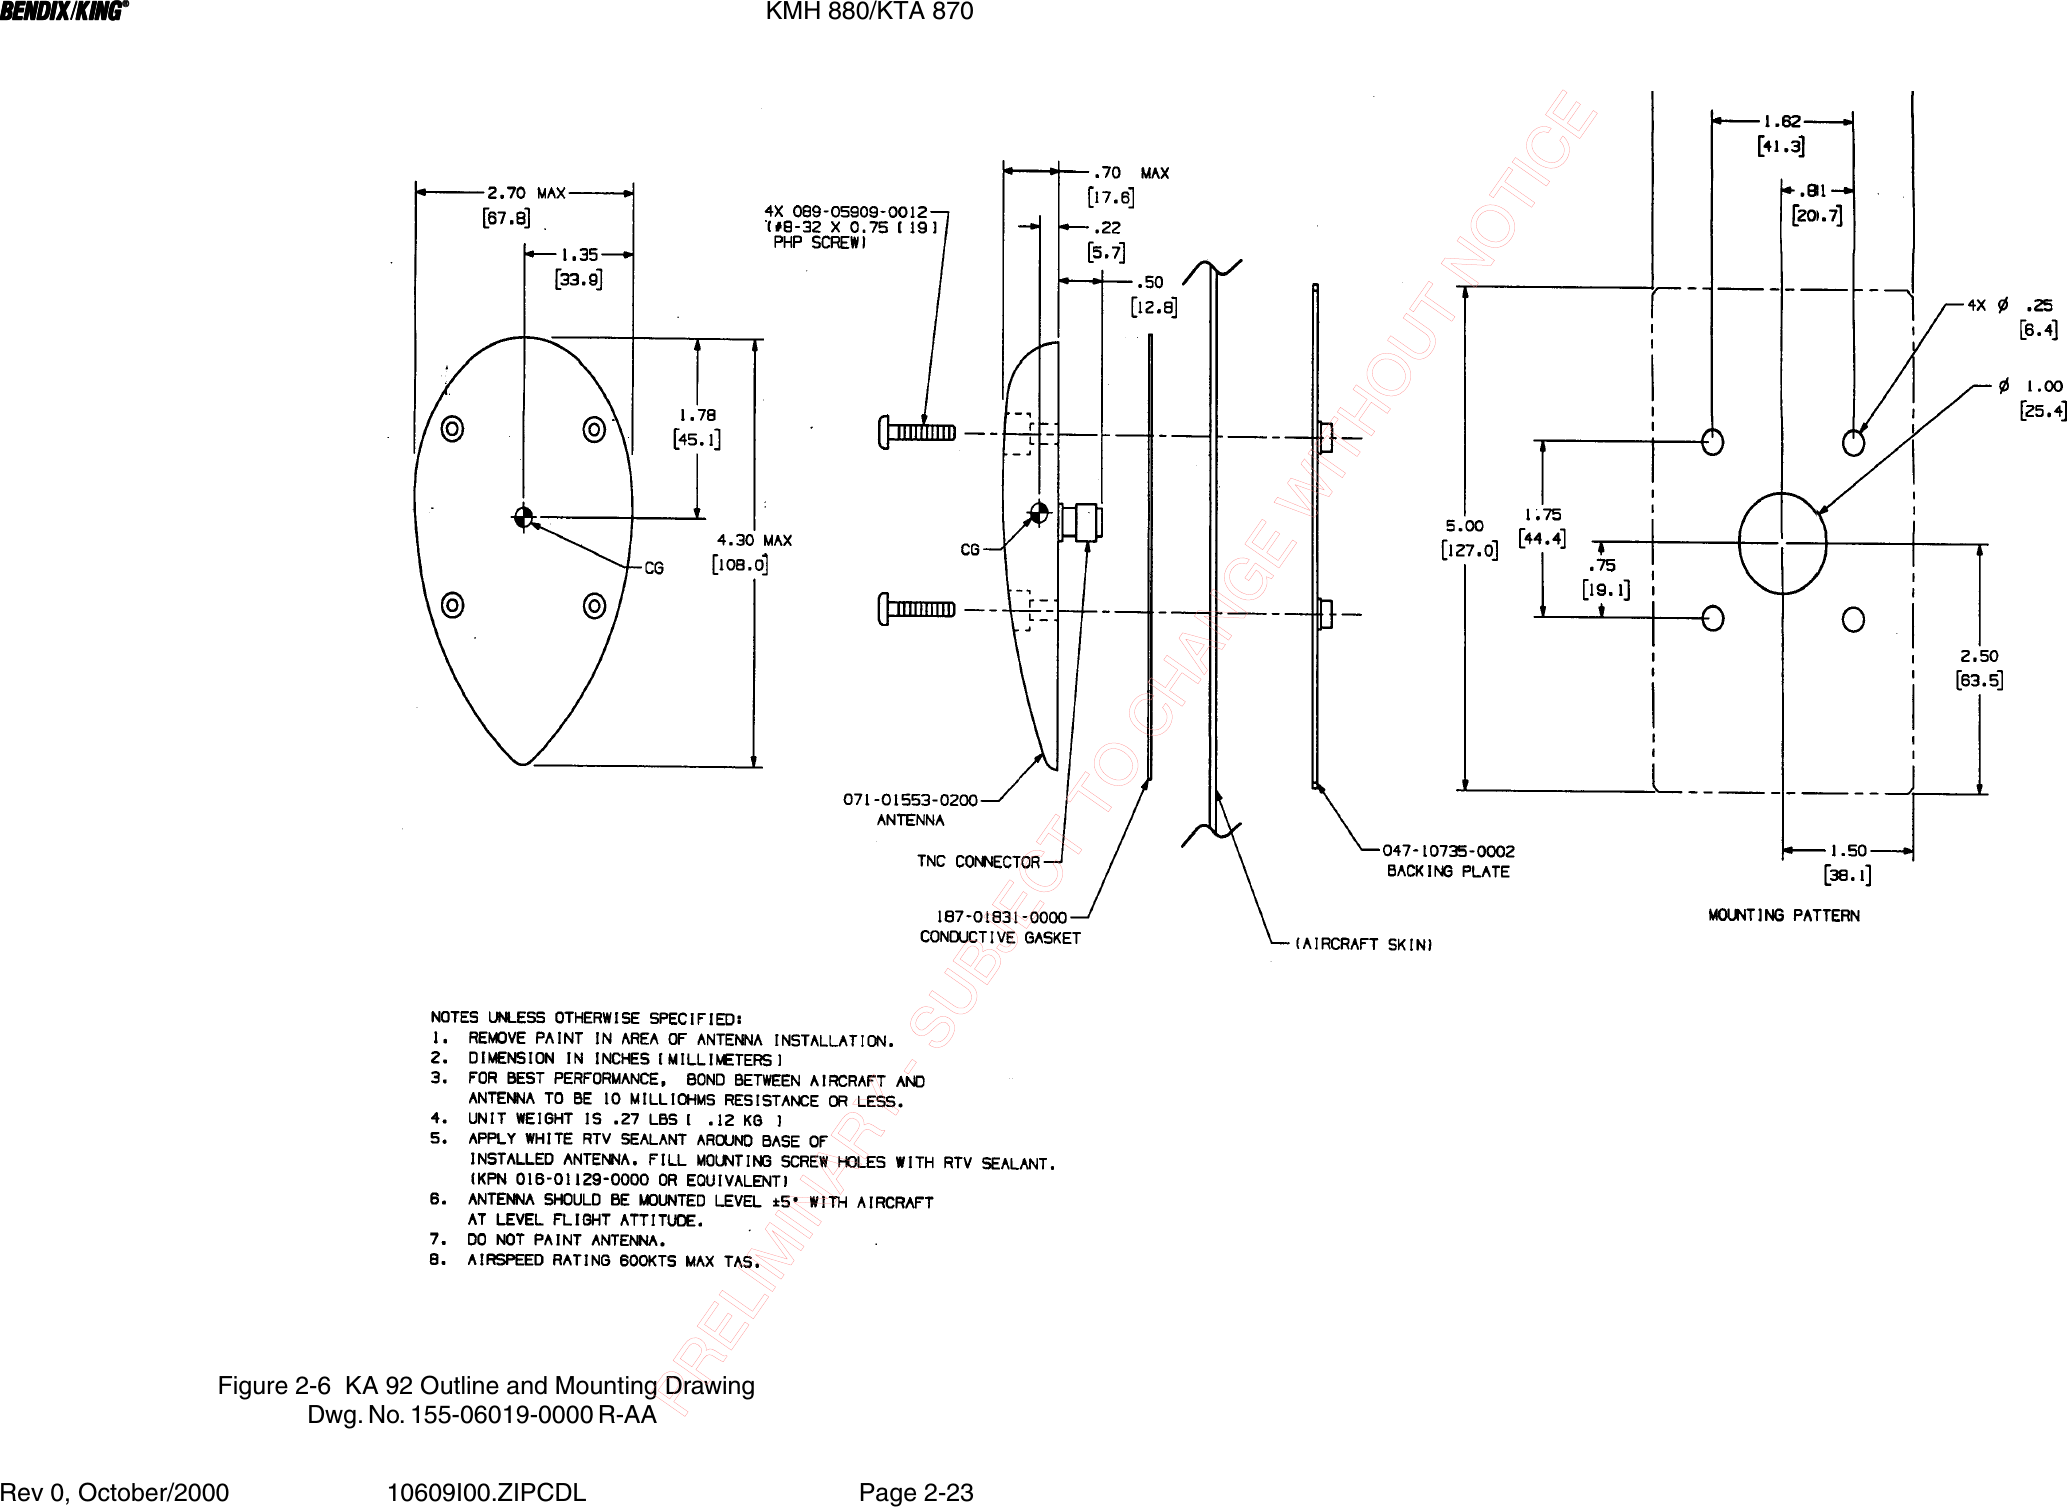 BBBBKMH 880/KTA 870Rev 0, October/2000 10609I00.ZIPCDL Page 2-23Figure 2-6  KA 92 Outline and Mounting DrawingDwg. No. 155-06019-0000 R-AA  PRELIMINARY - SUBJECT TO CHANGE WITHOUT NOTICE